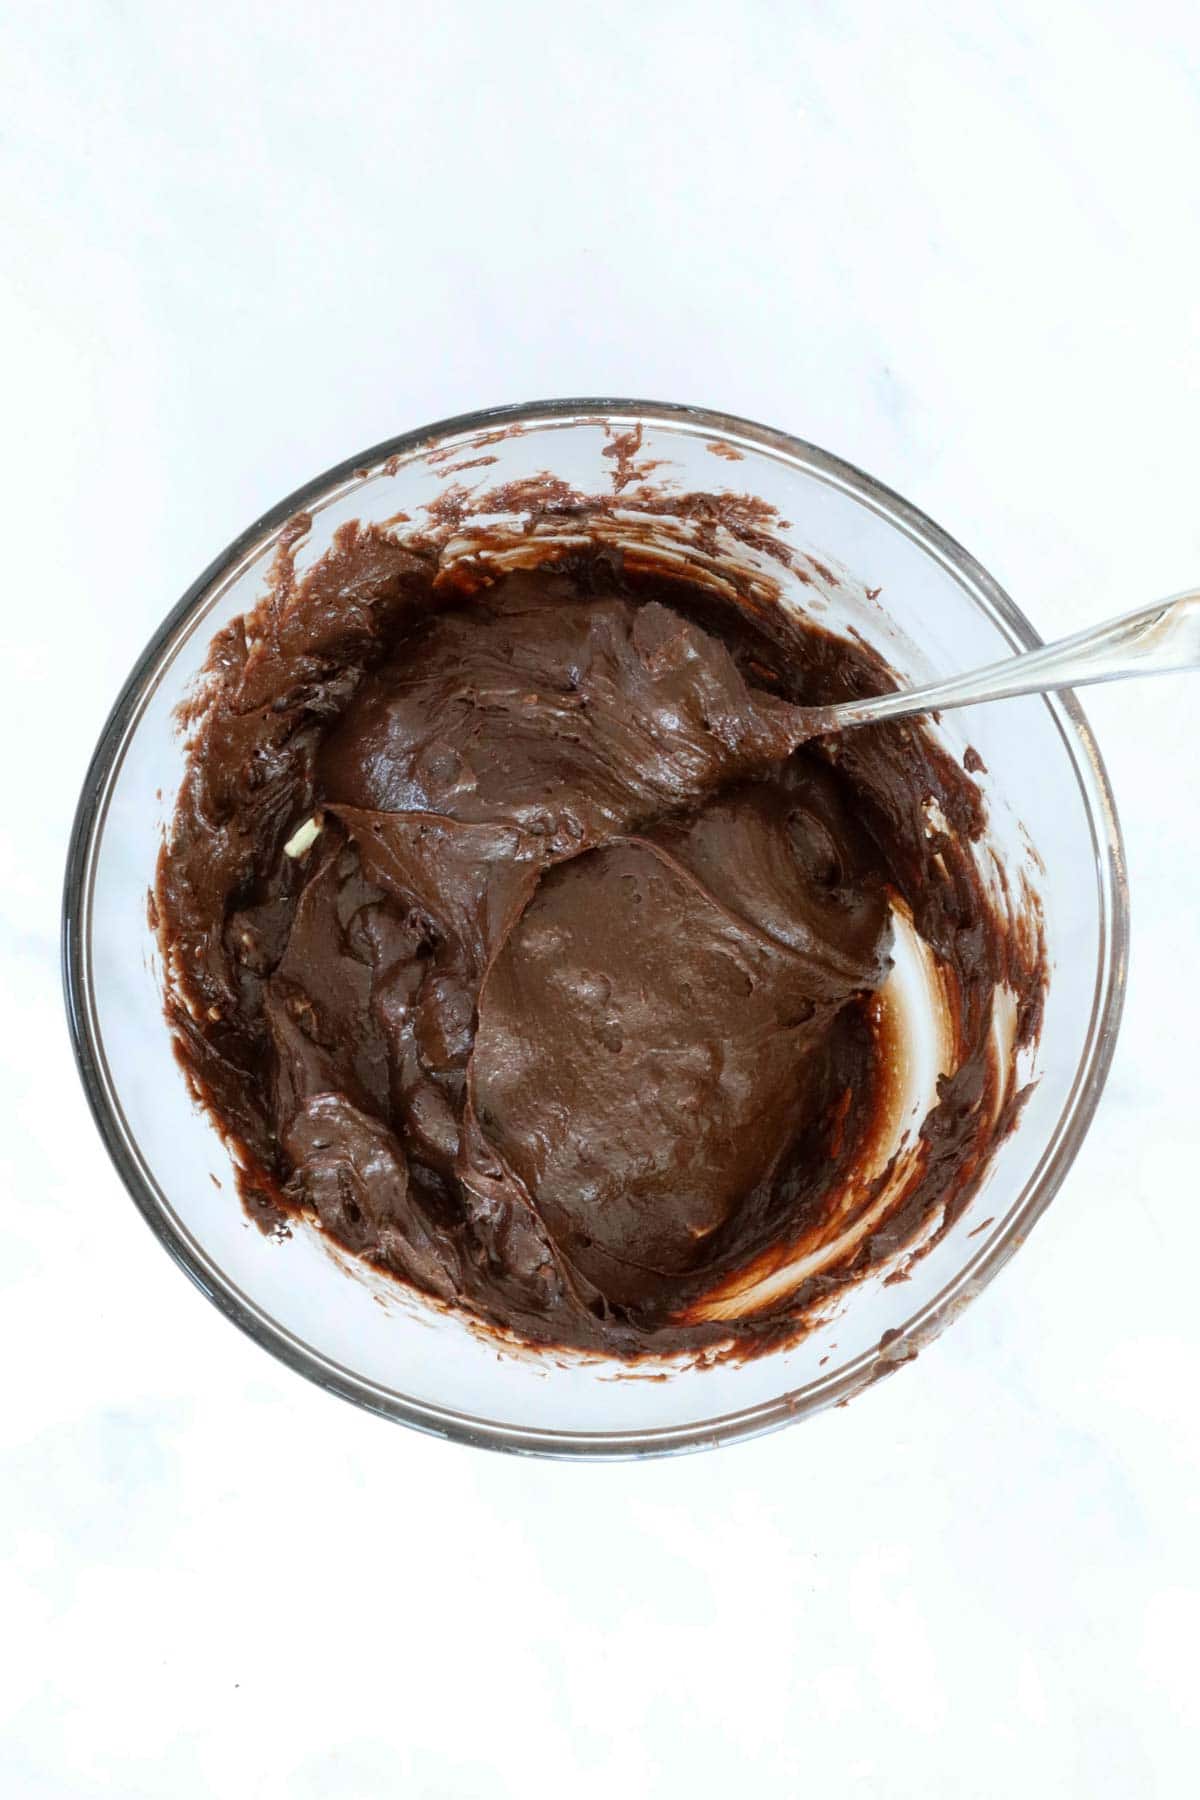 A dark chocolate mxture in a glass mixing bowl.